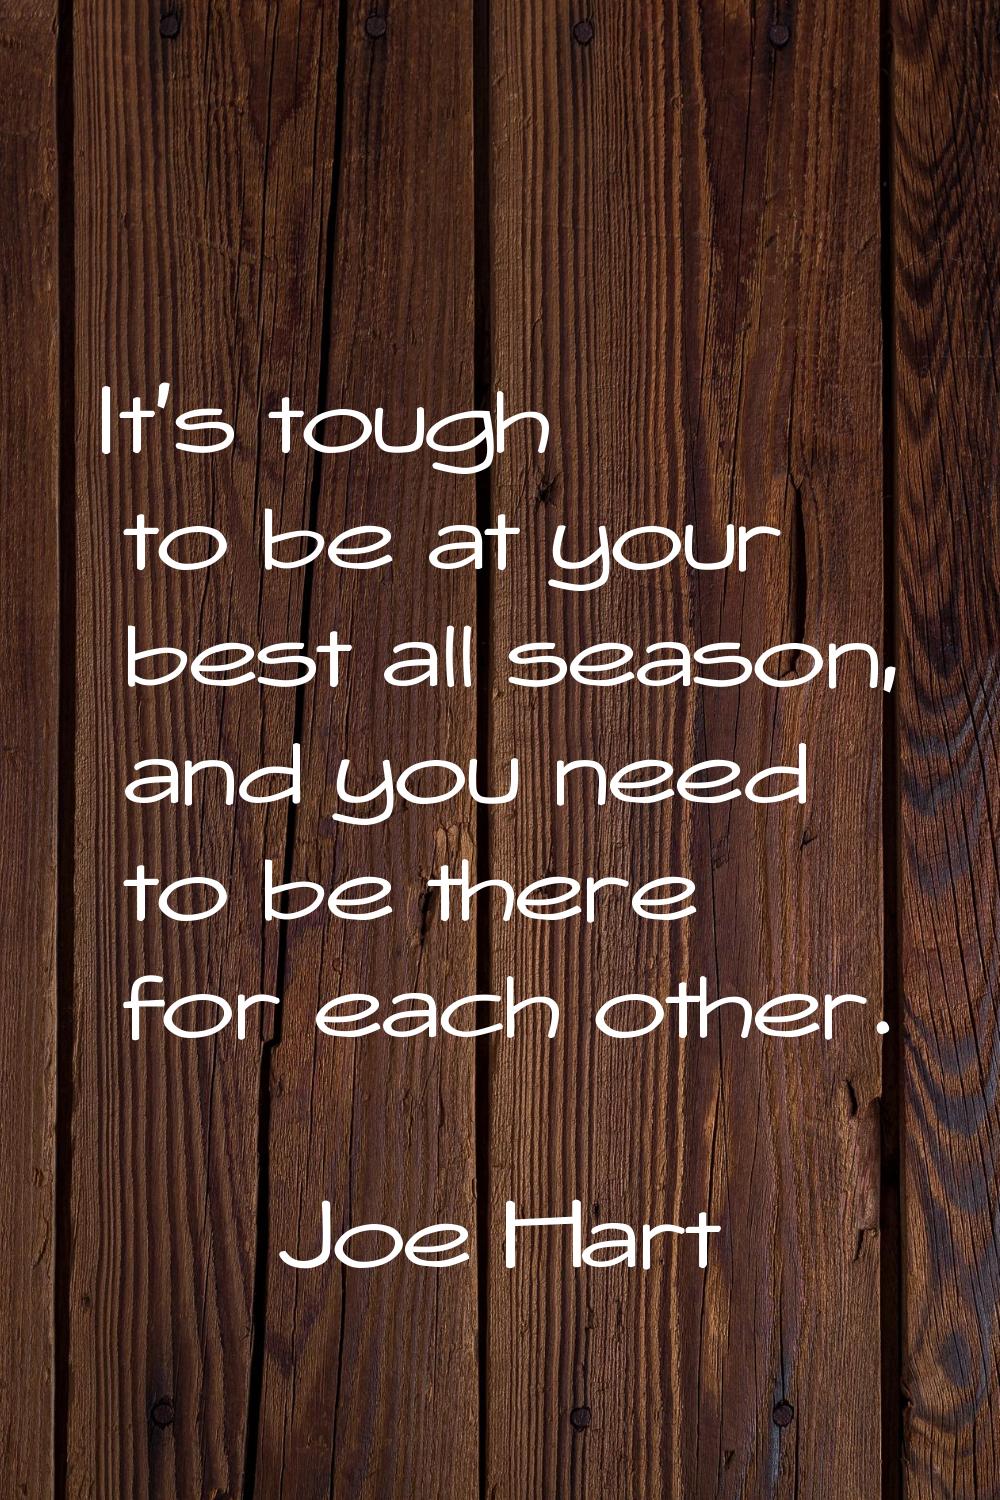 It's tough to be at your best all season, and you need to be there for each other.